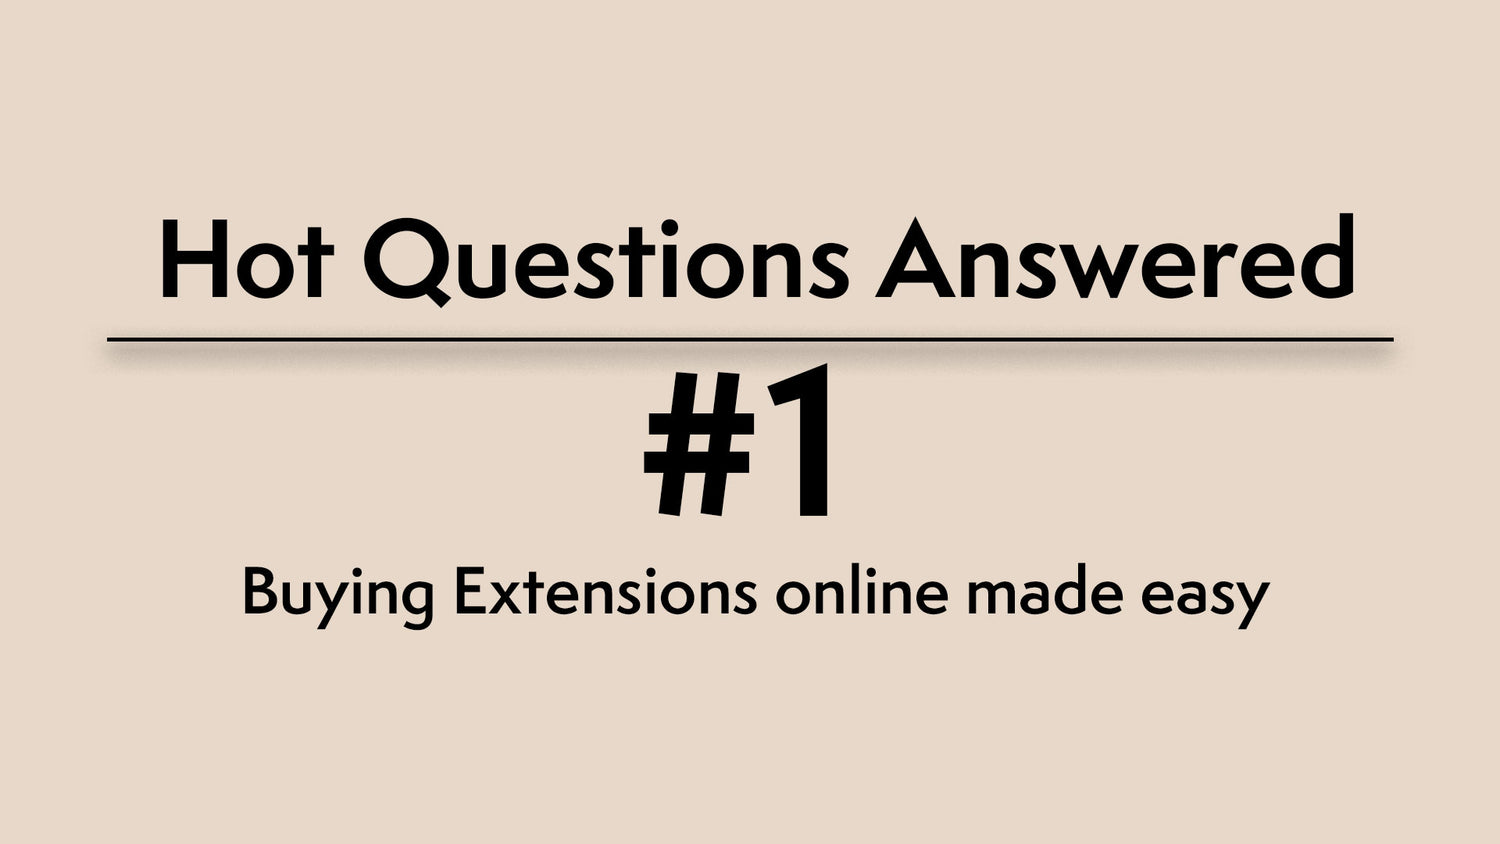 Hot Questions Answered #1: Buying Extensions online made easy